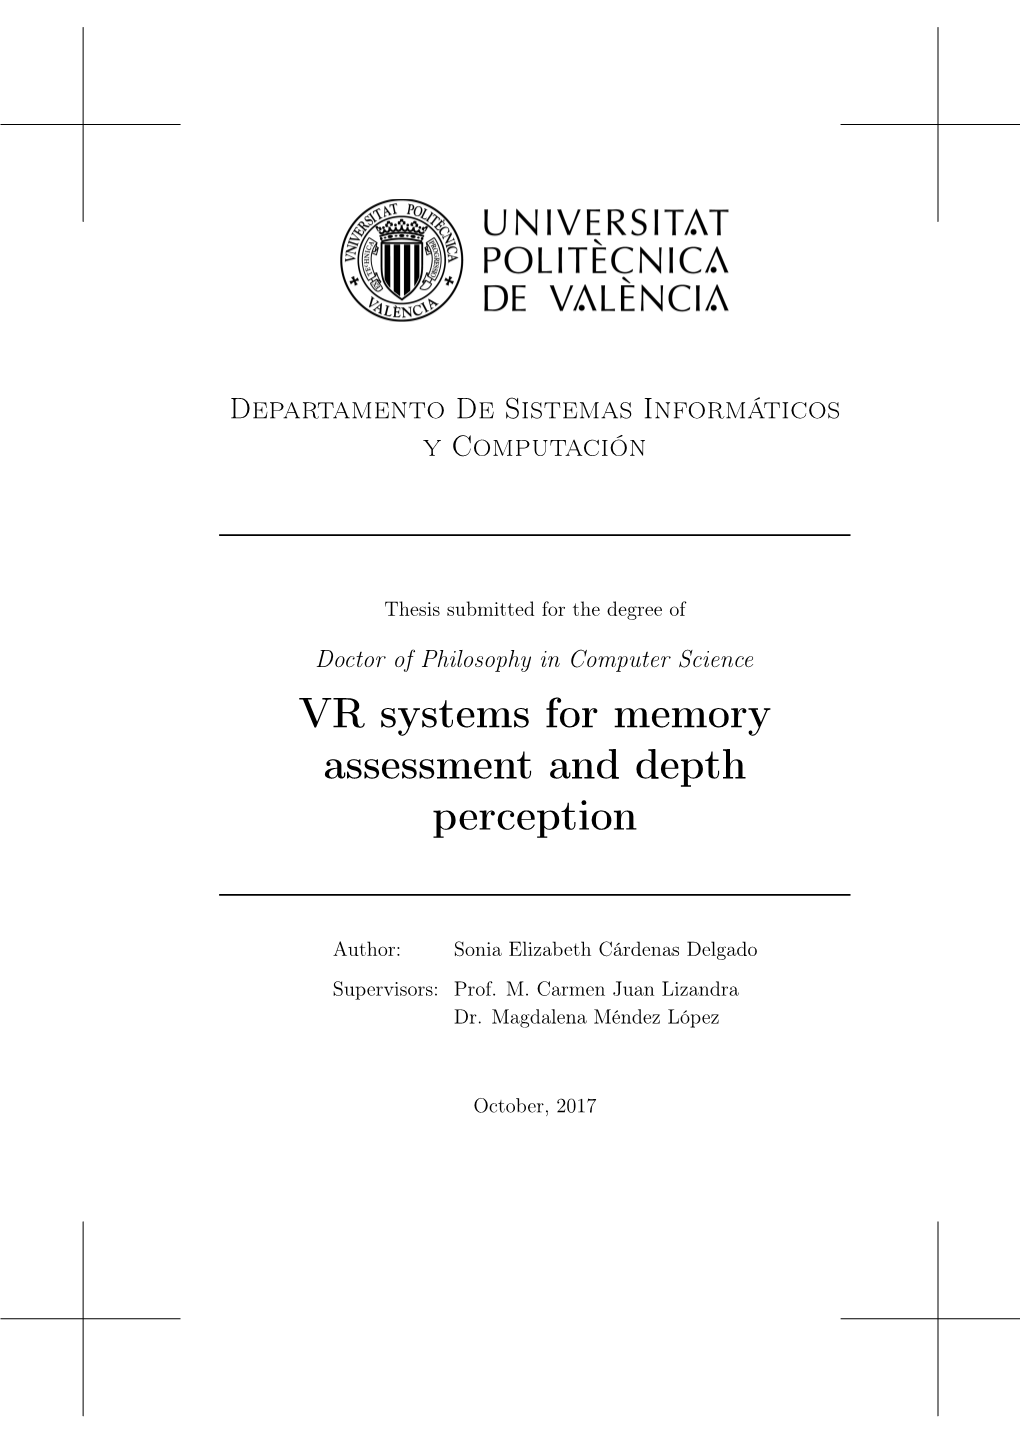 VR Systems for Memory Assessment and Depth Perception